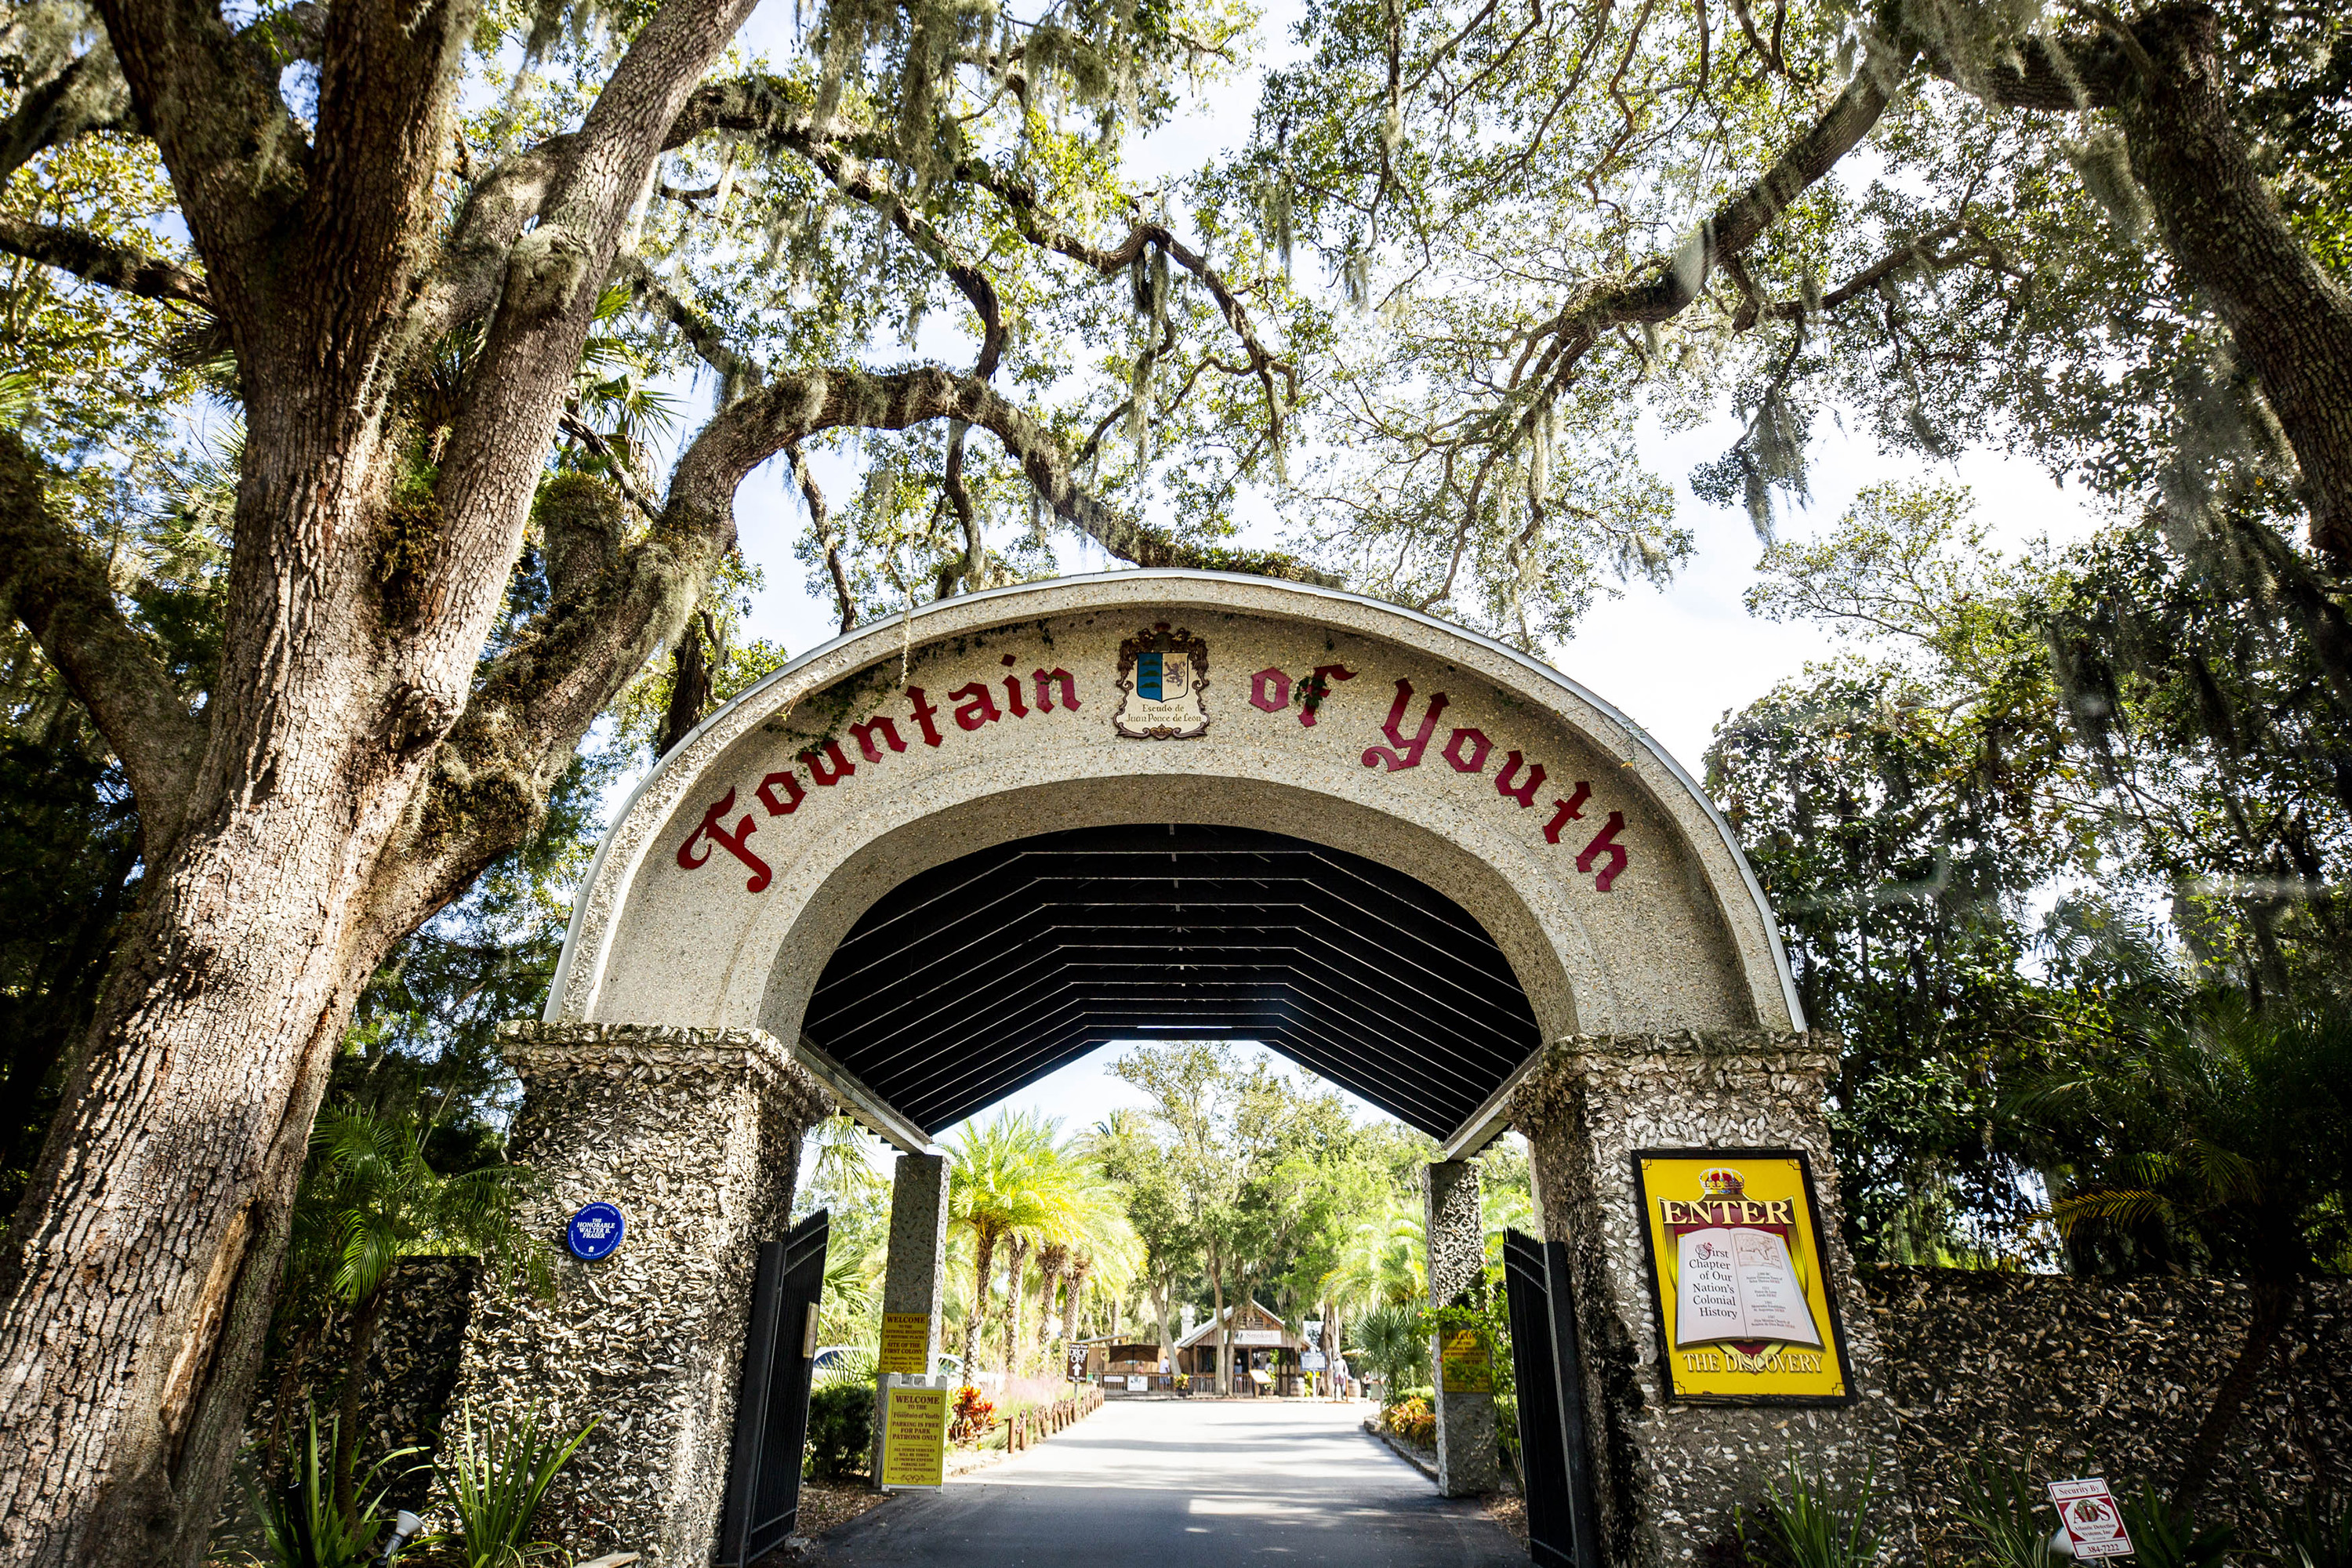 An archway greets visitors to the Fountain of Youth Archaeological Park in St. Augustine, Florida on Monday, Oct. 26, 2020.